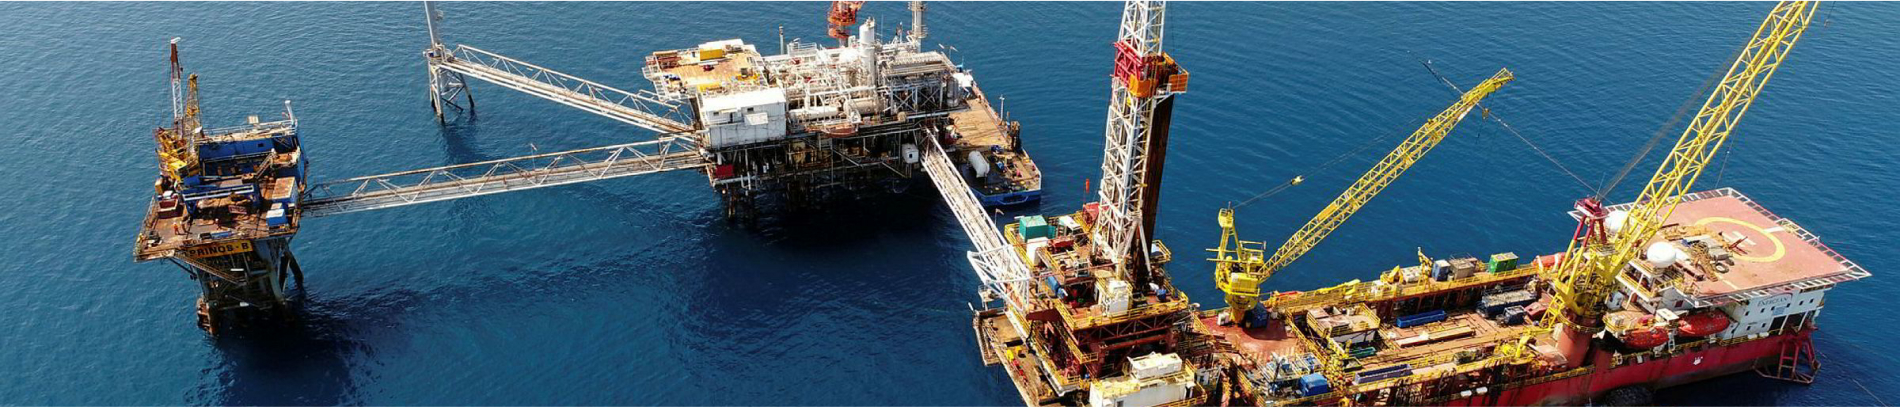 HEREMA - Upstream Oil & Gas Pages